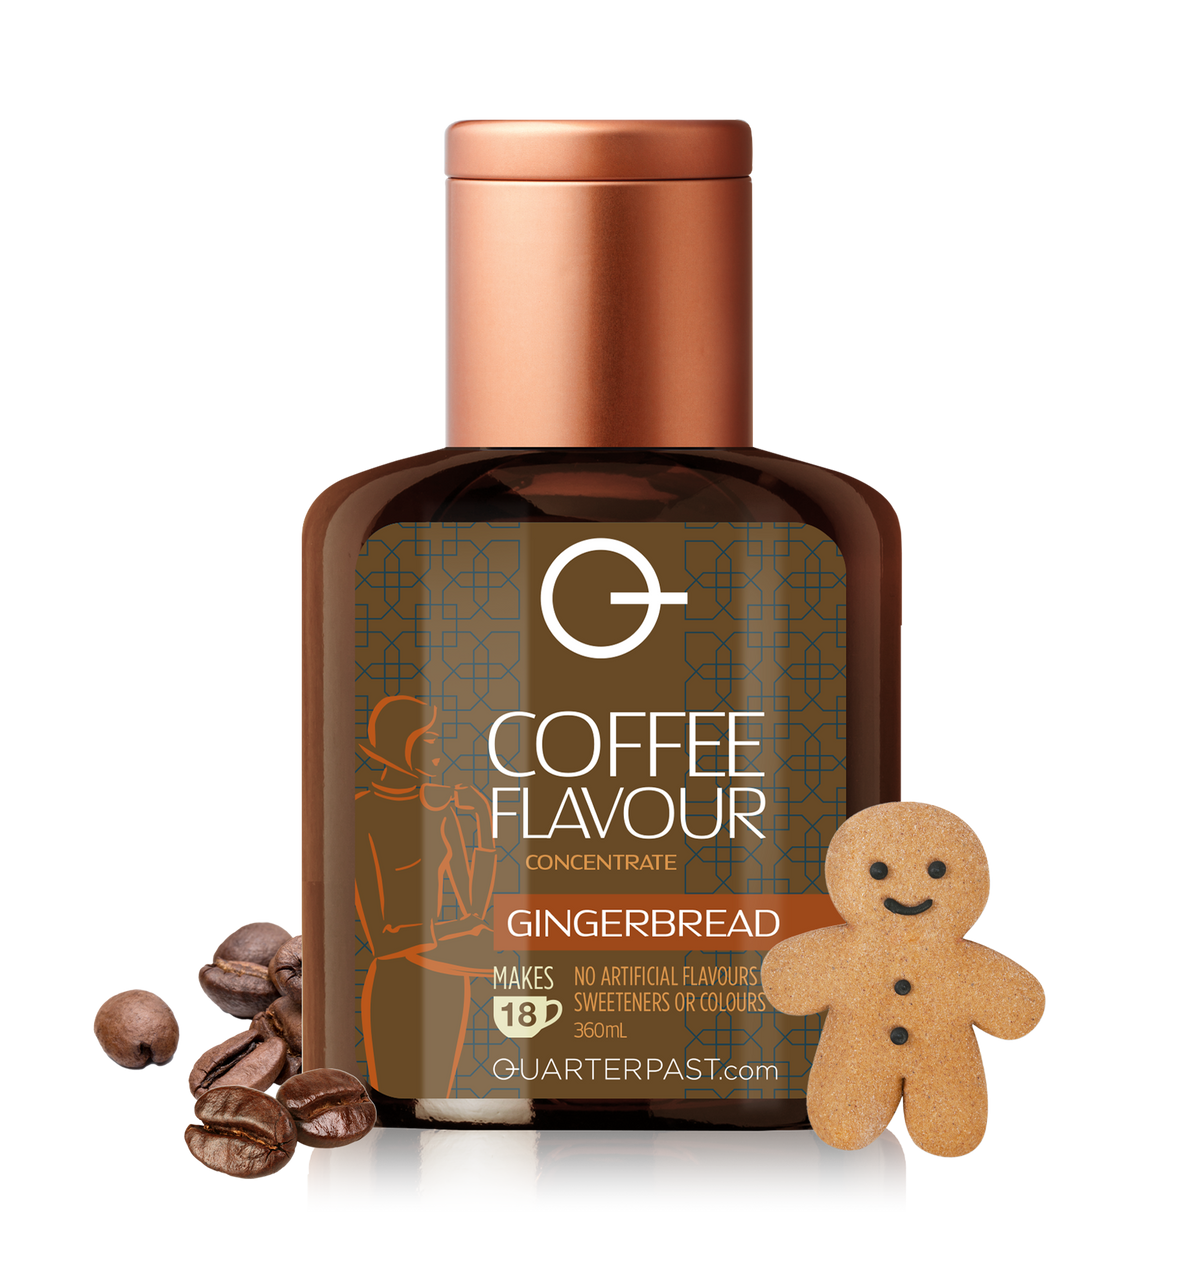 Gingerbread Coffee Flavour